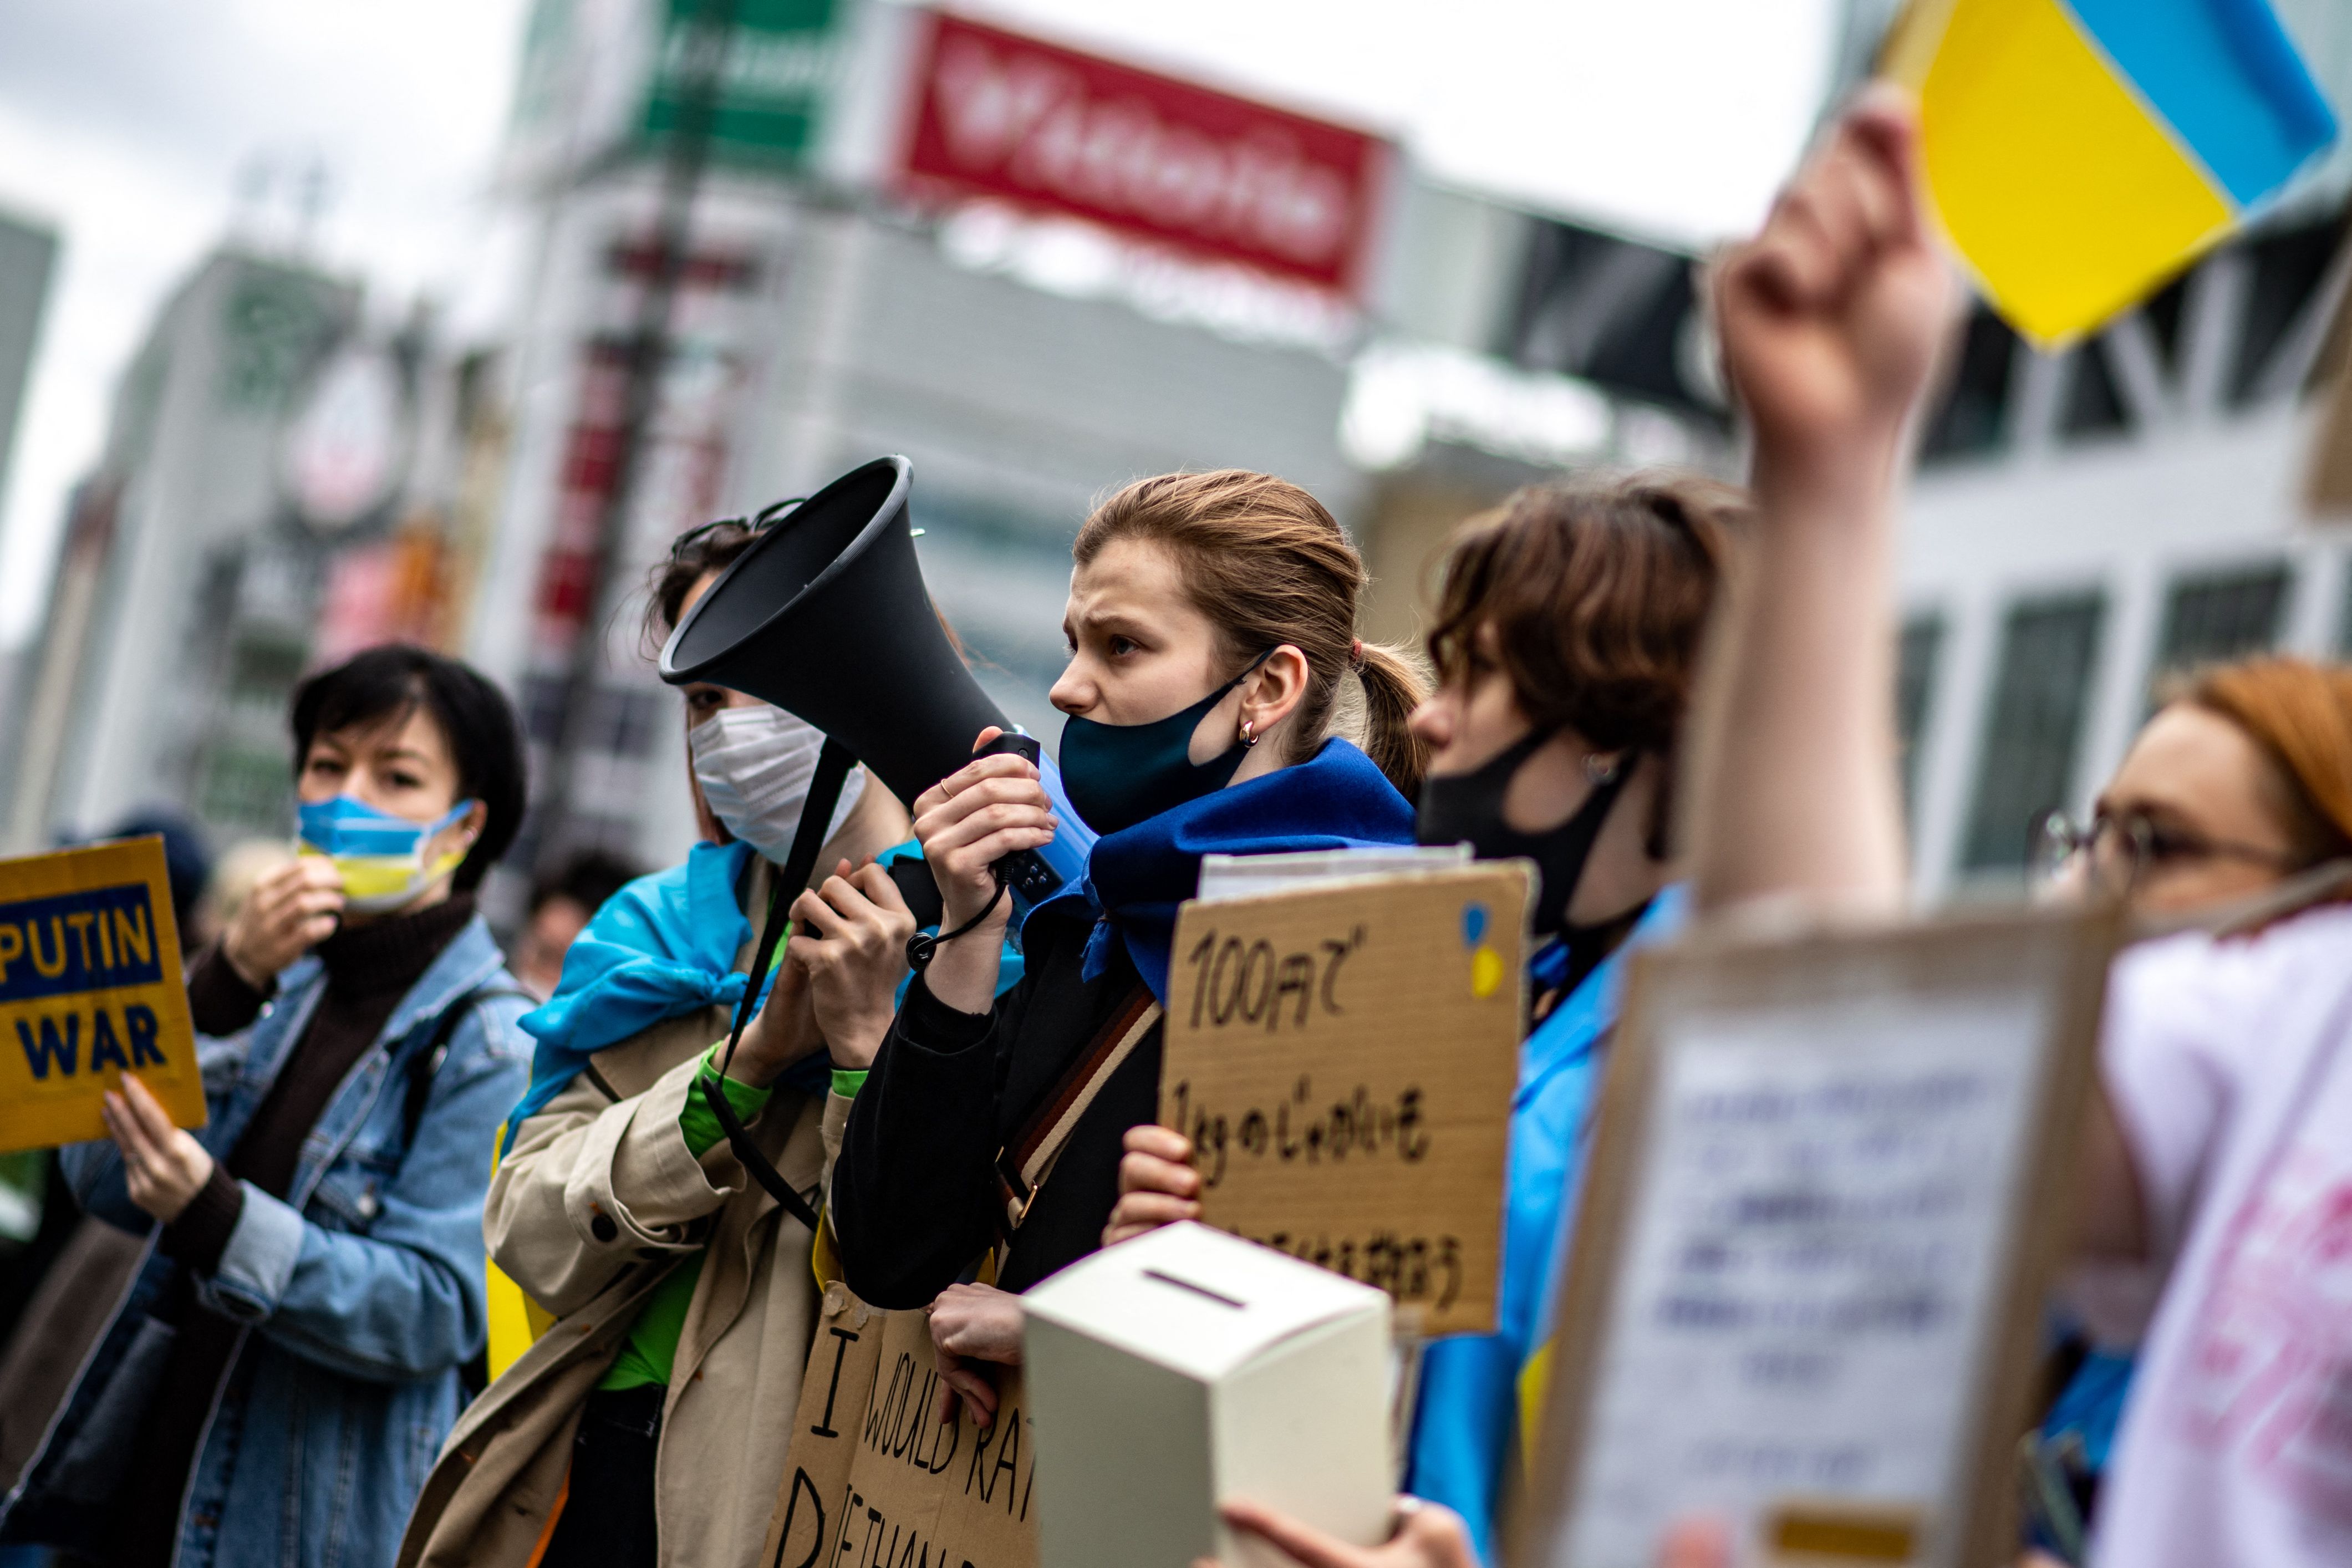 People take part in a fundraising demonstration to support Ukraine in Tokyo's Shinjuku district on March 26.